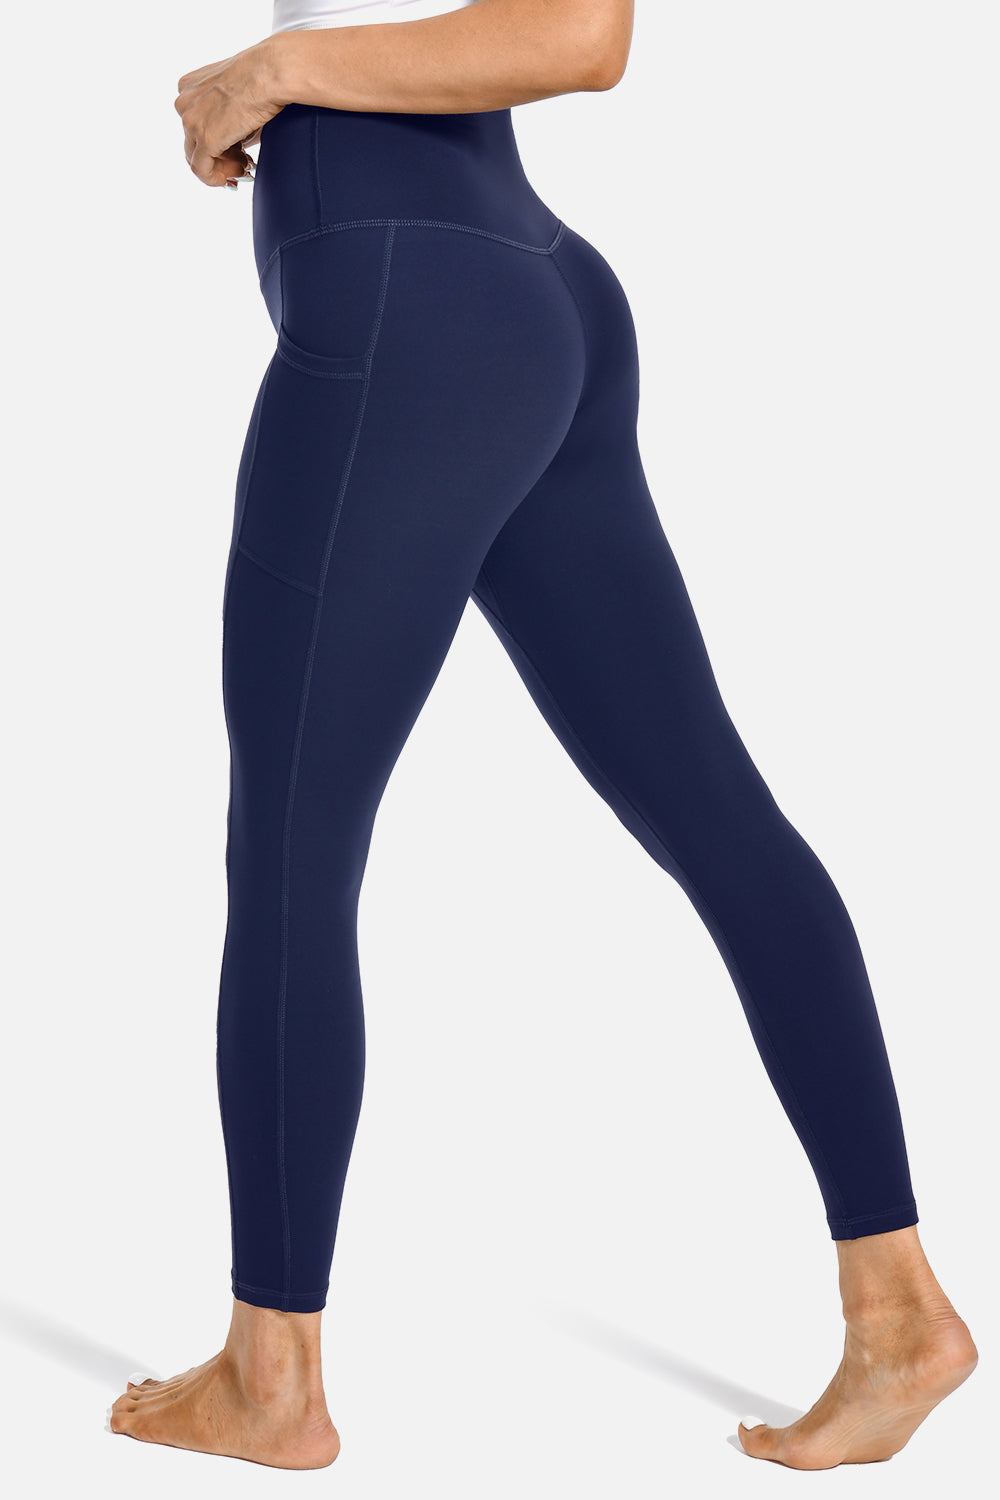 Colorfulkoala Leggings Are the Next Big Thing in Activewear